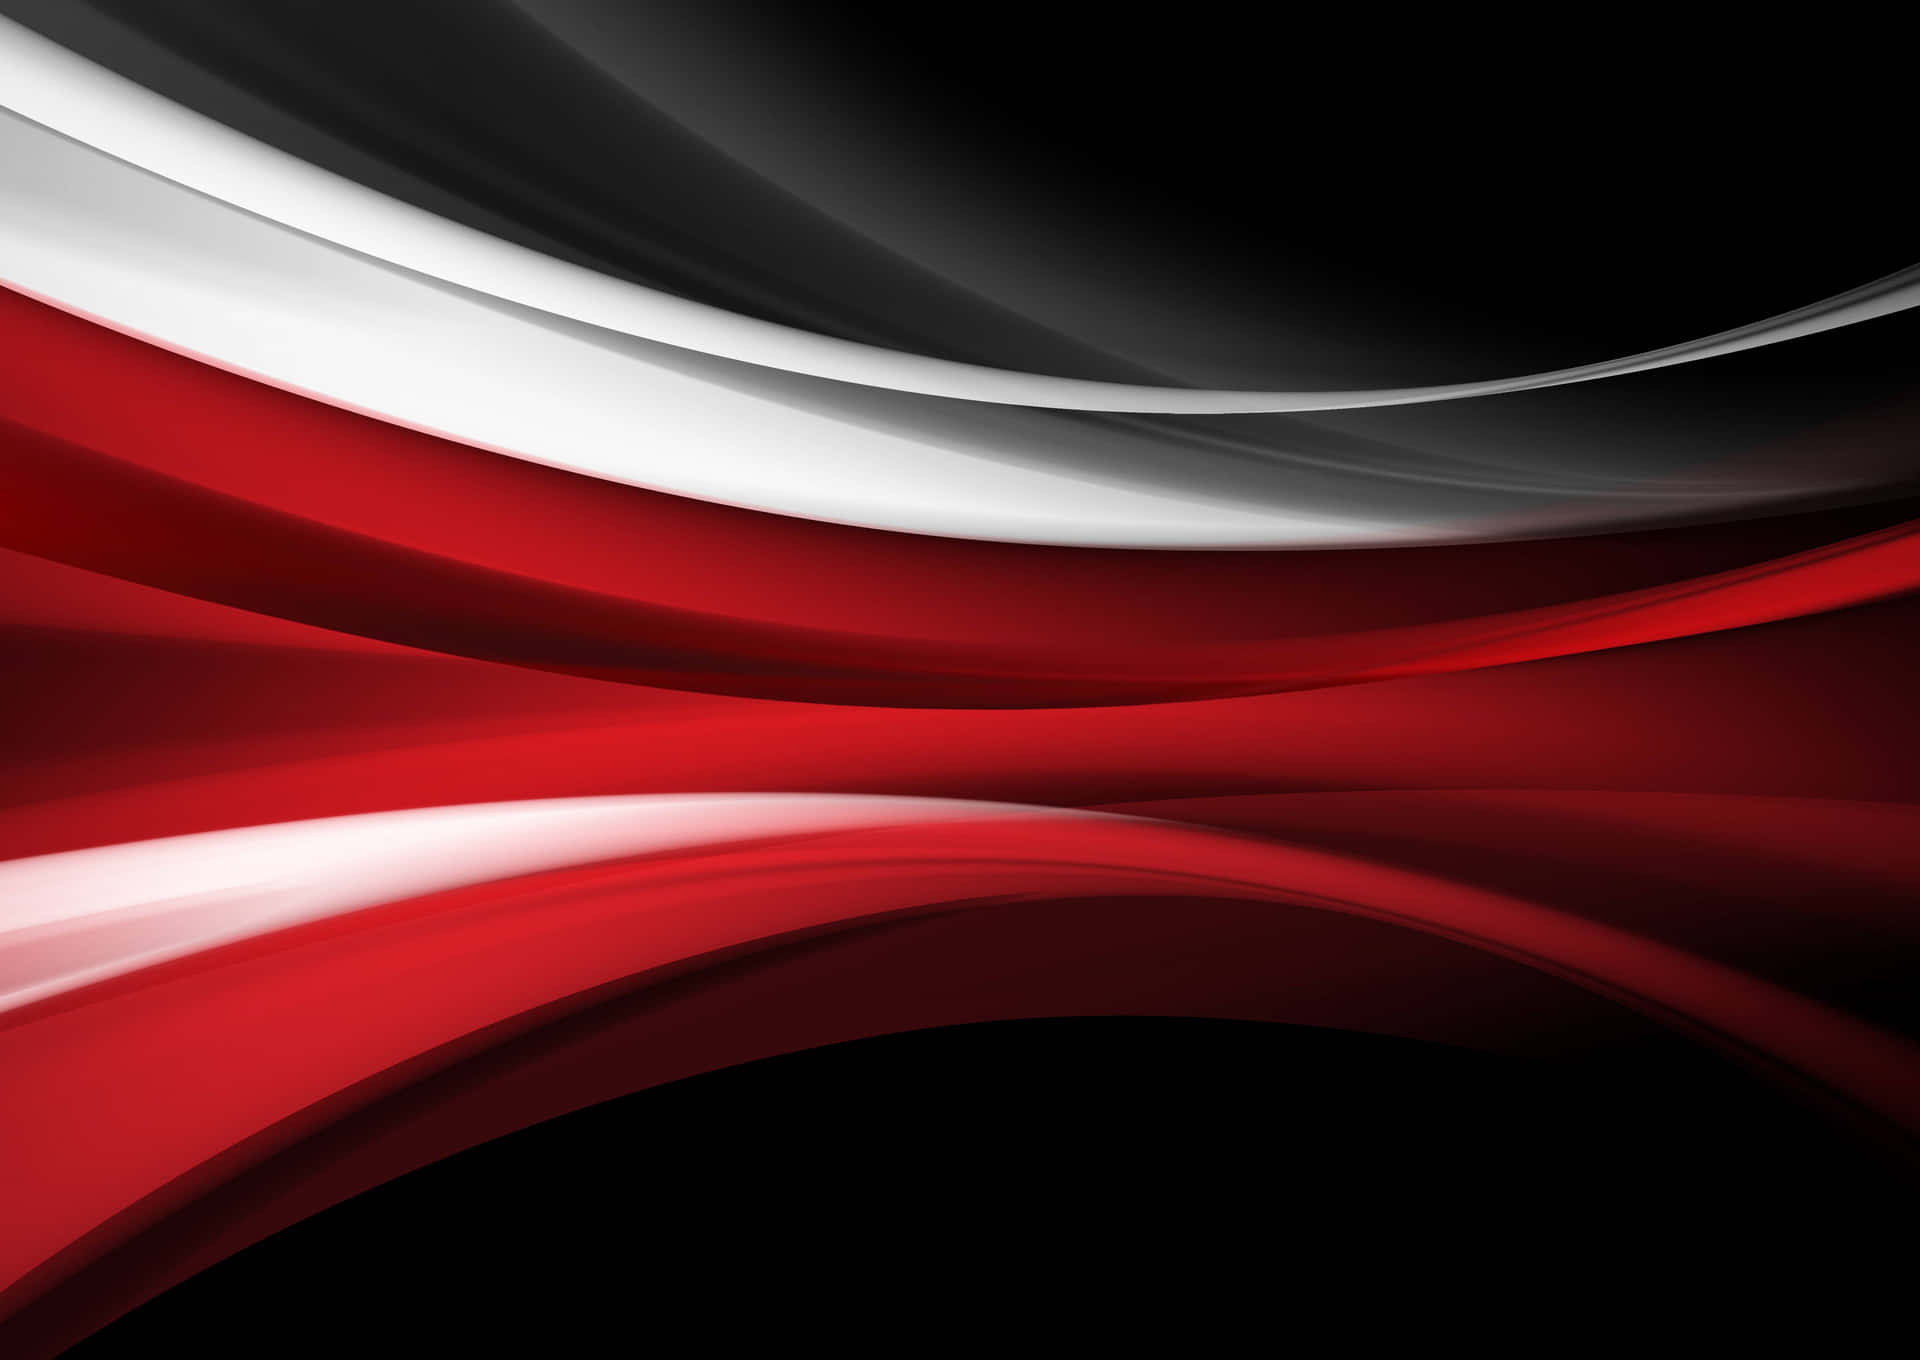 A Dark Abstract Design Featuring Red and Black